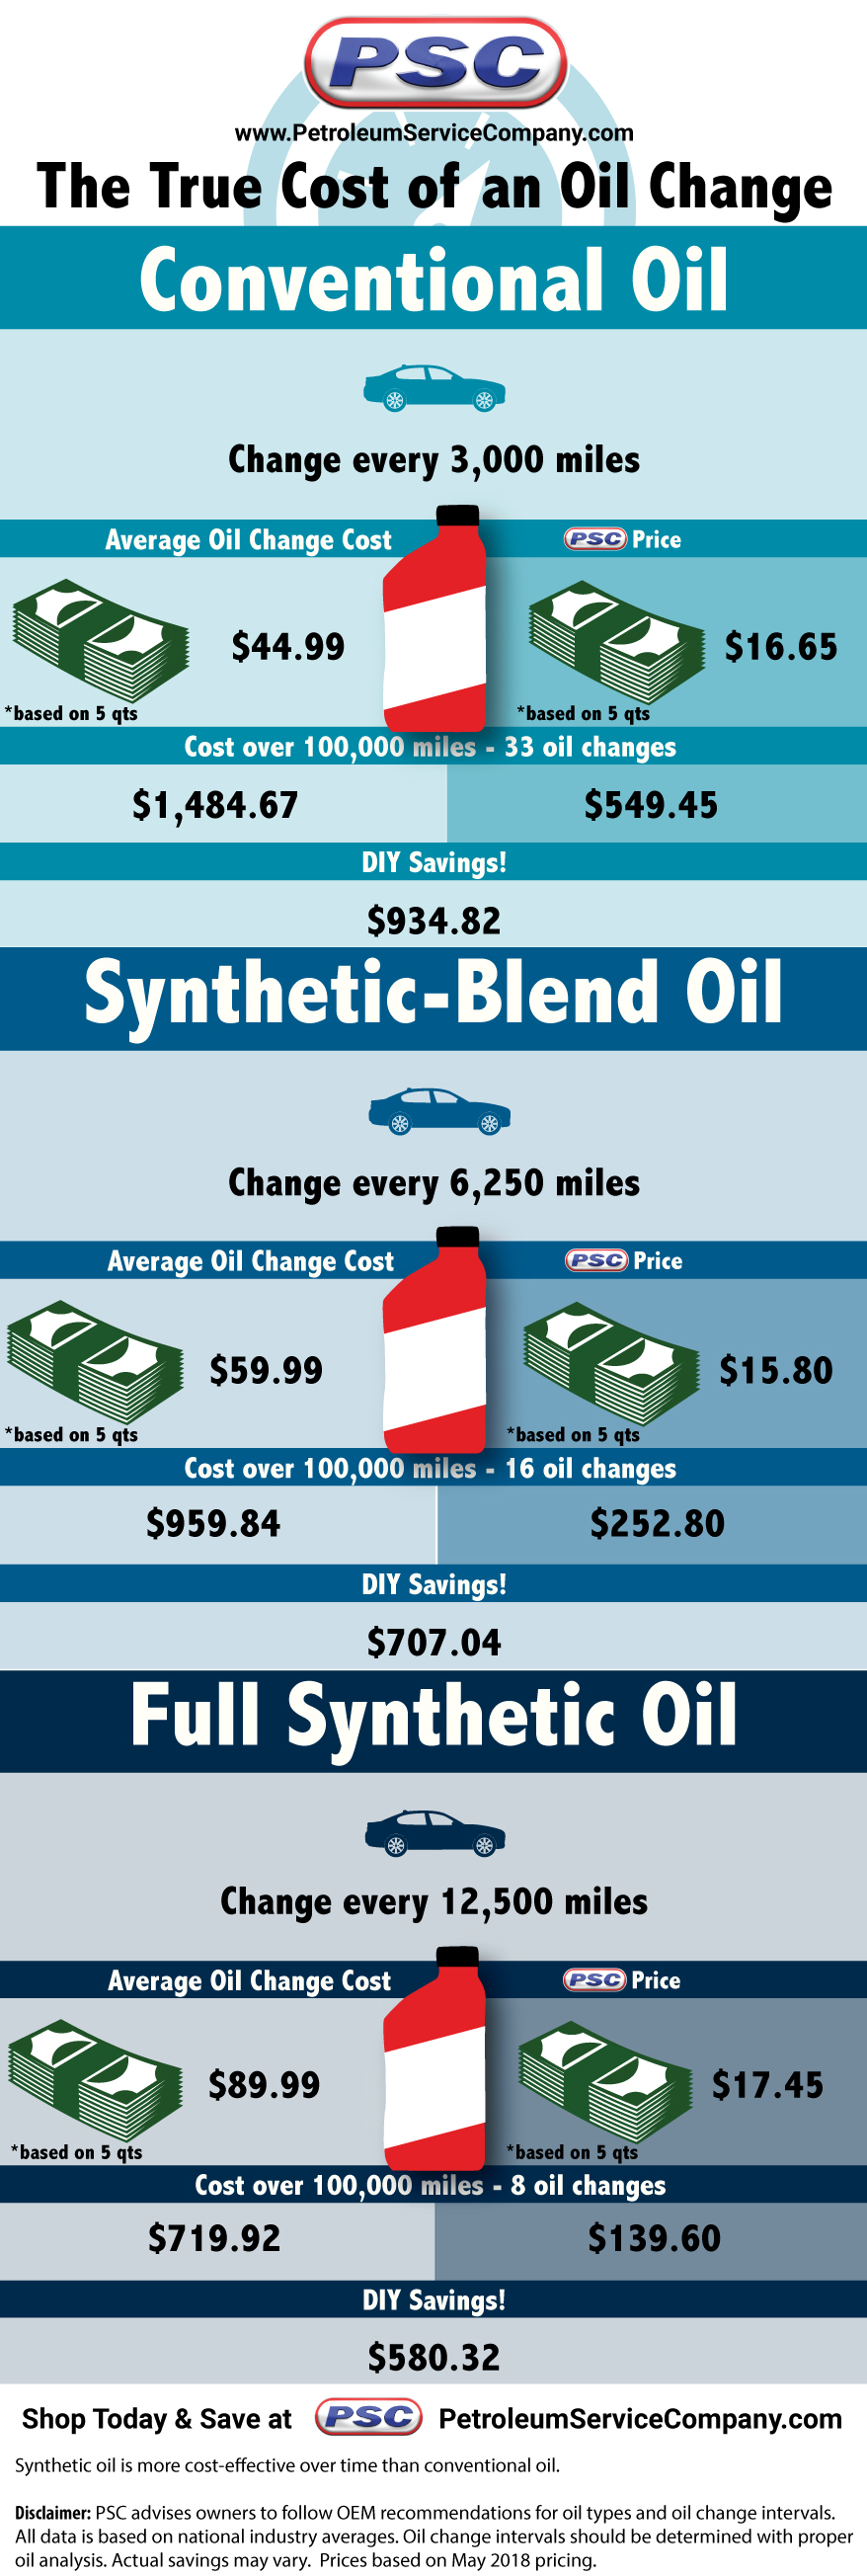 The True Cost of an Oil Change